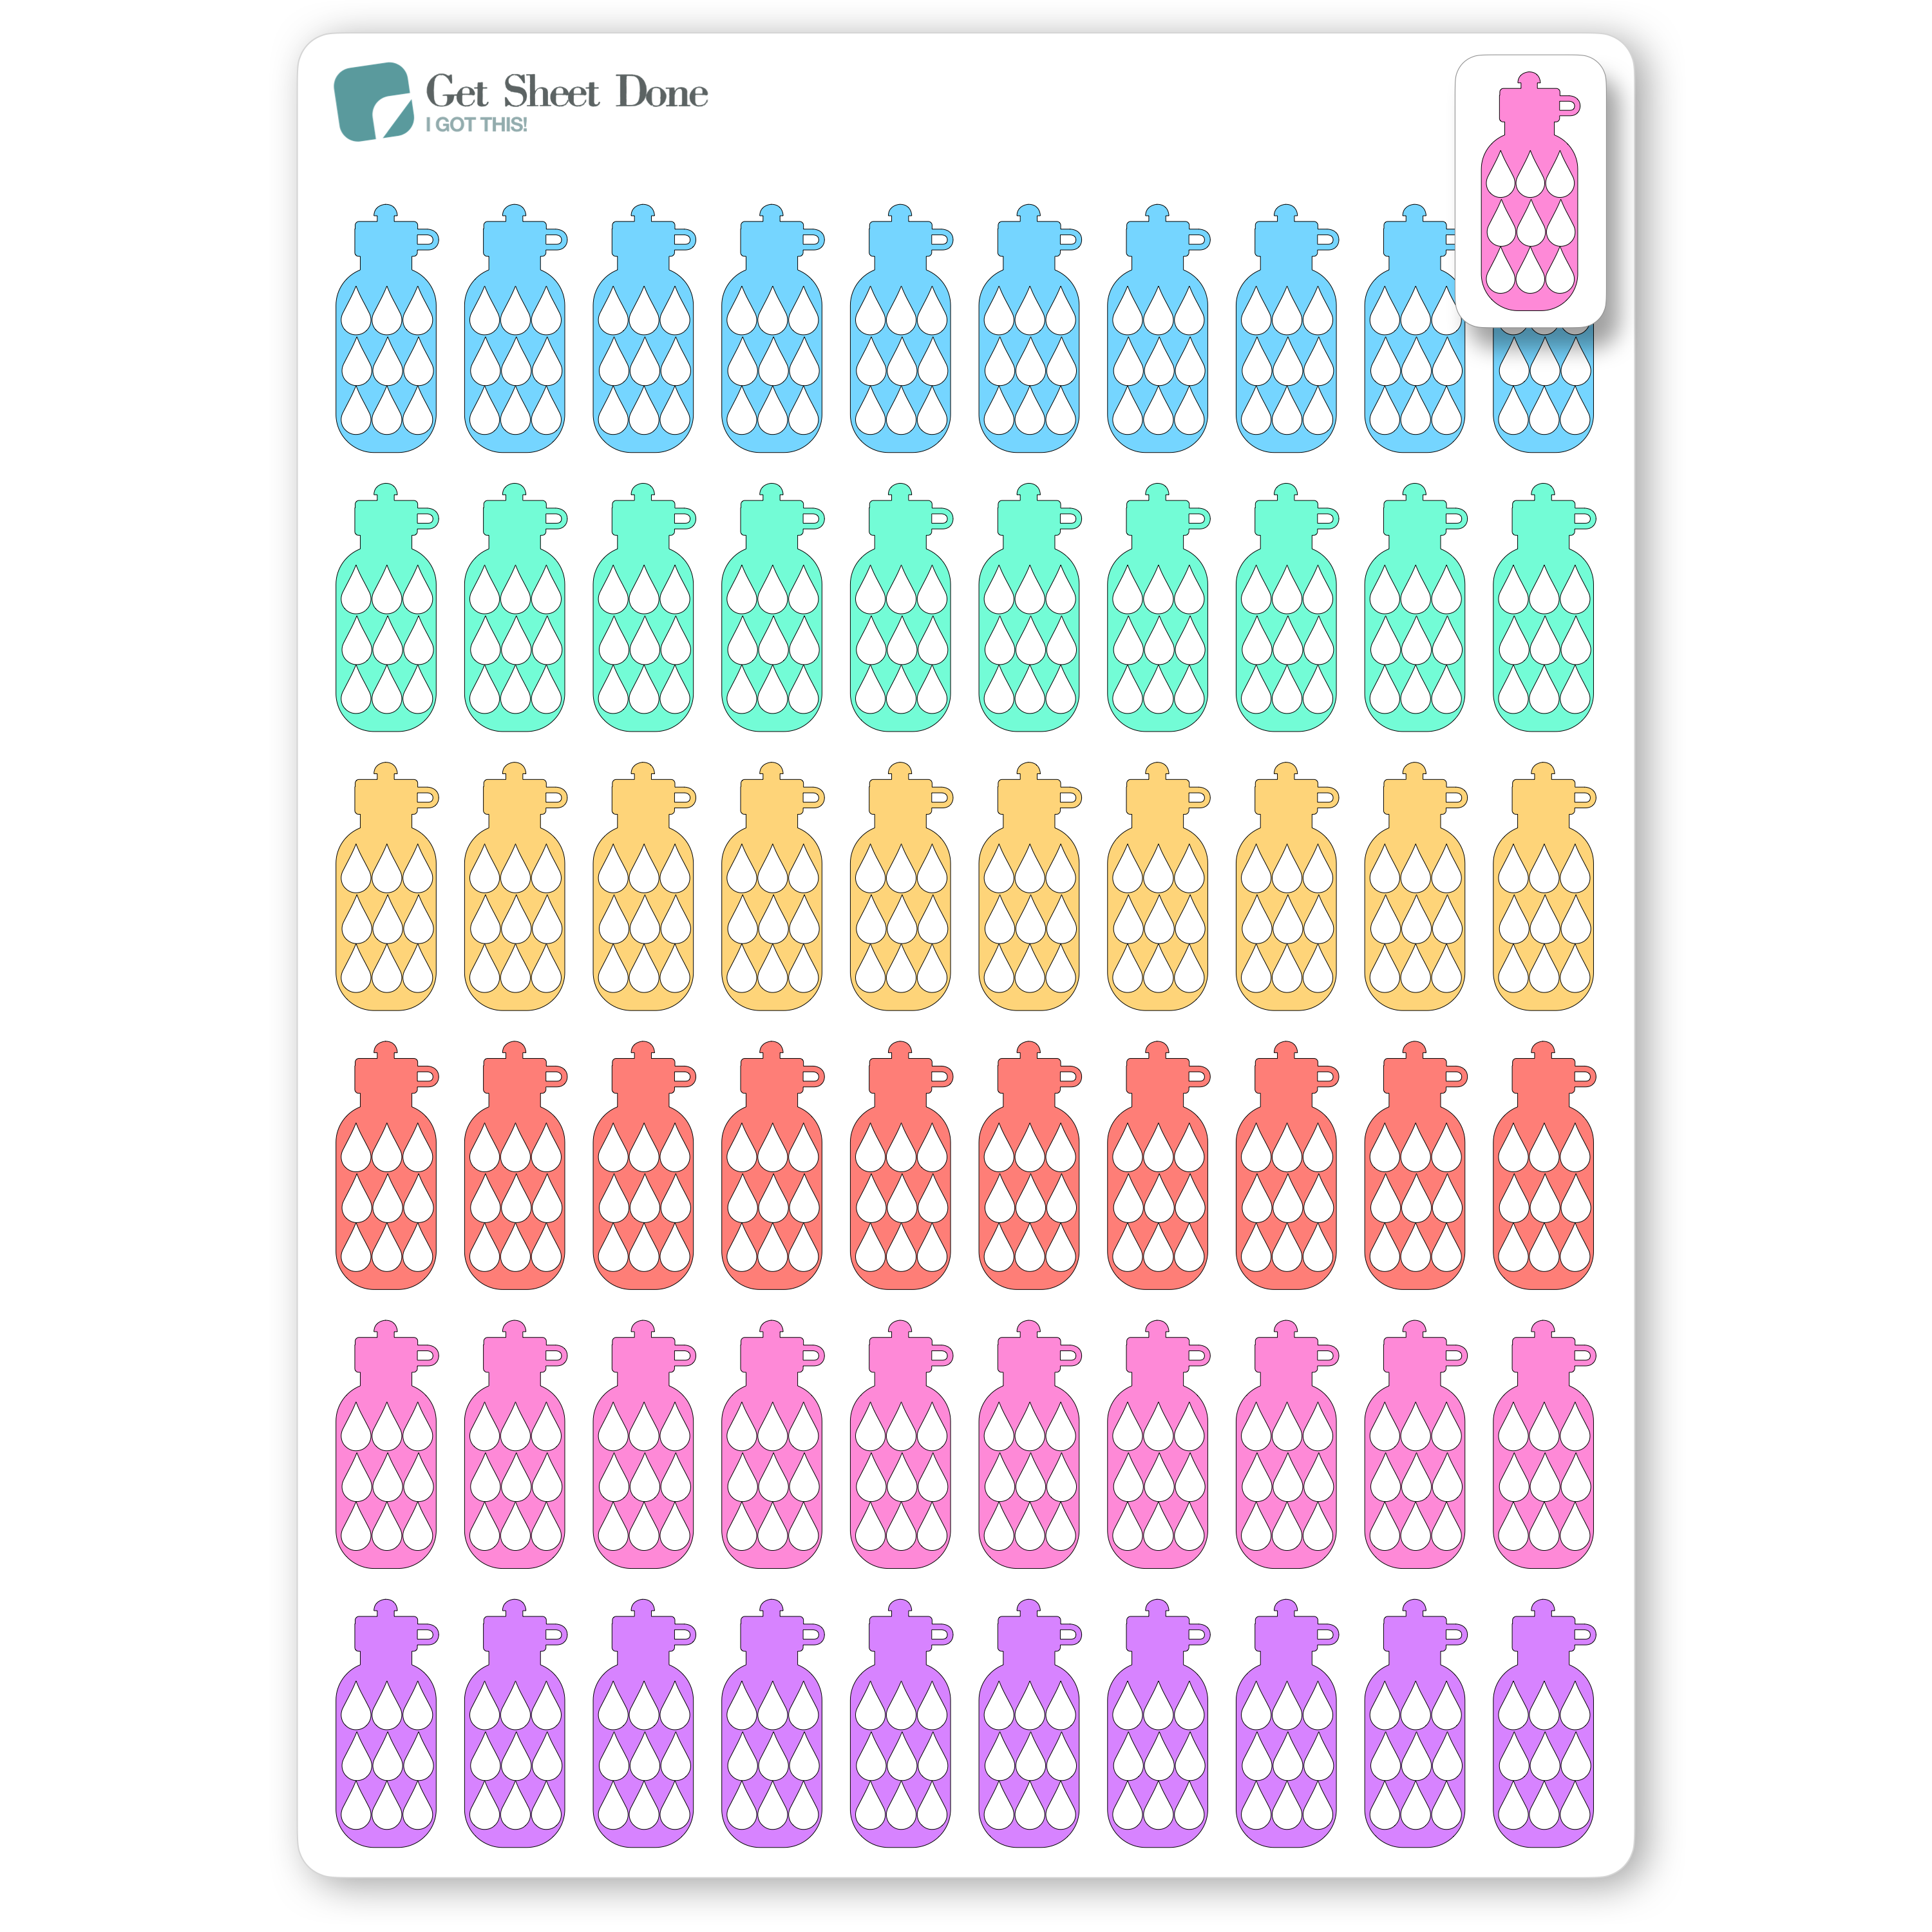 Water Tracker Stickers - Habit Stickers - Health and Wellness Stickers –  Get Sheet Done